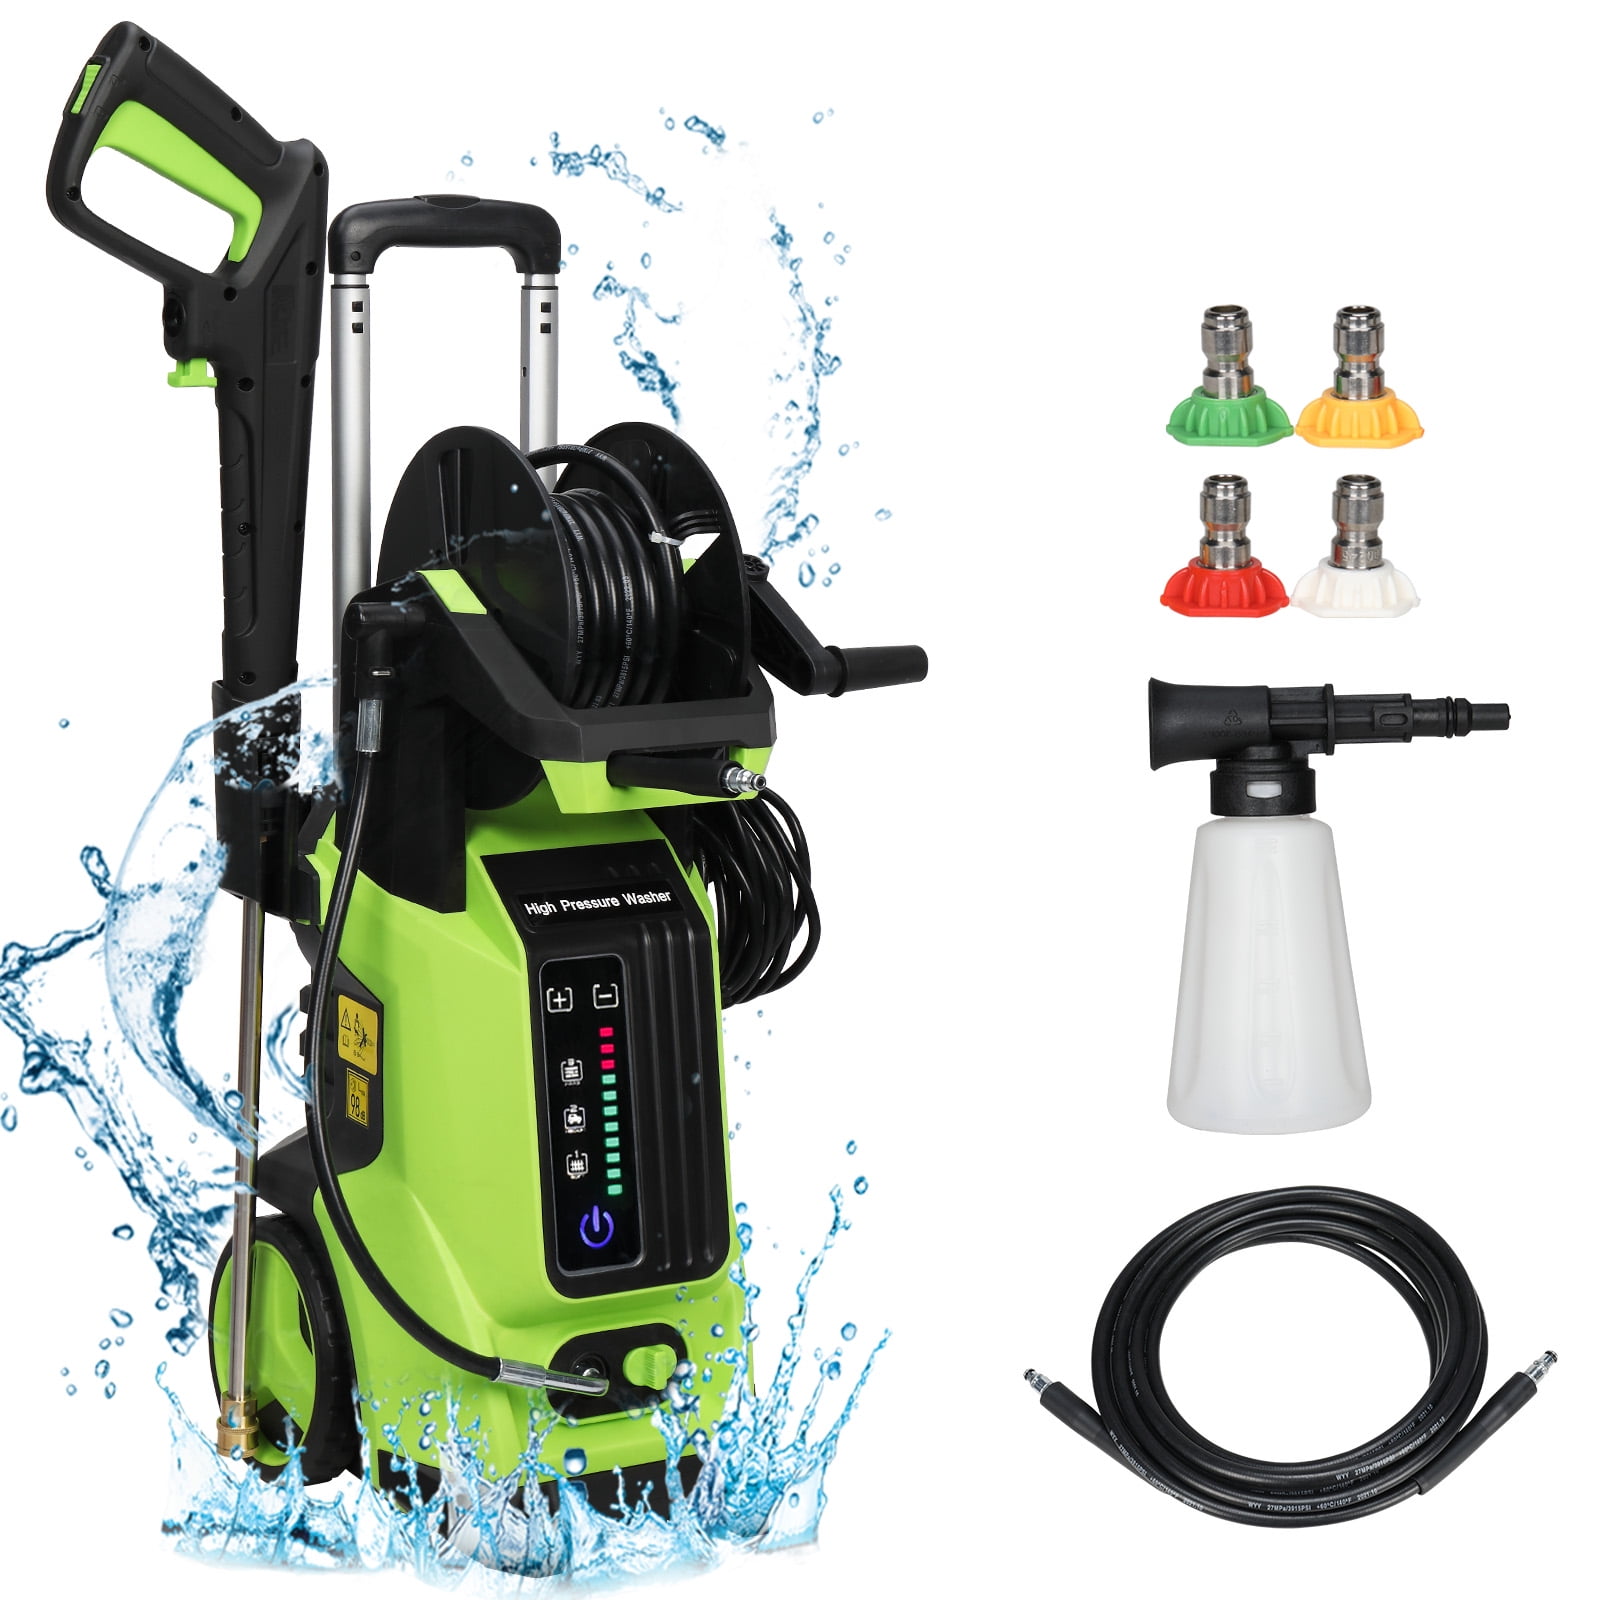 Ktaxon High Pressure Washer, 3380PSI 2GPM Electric Power